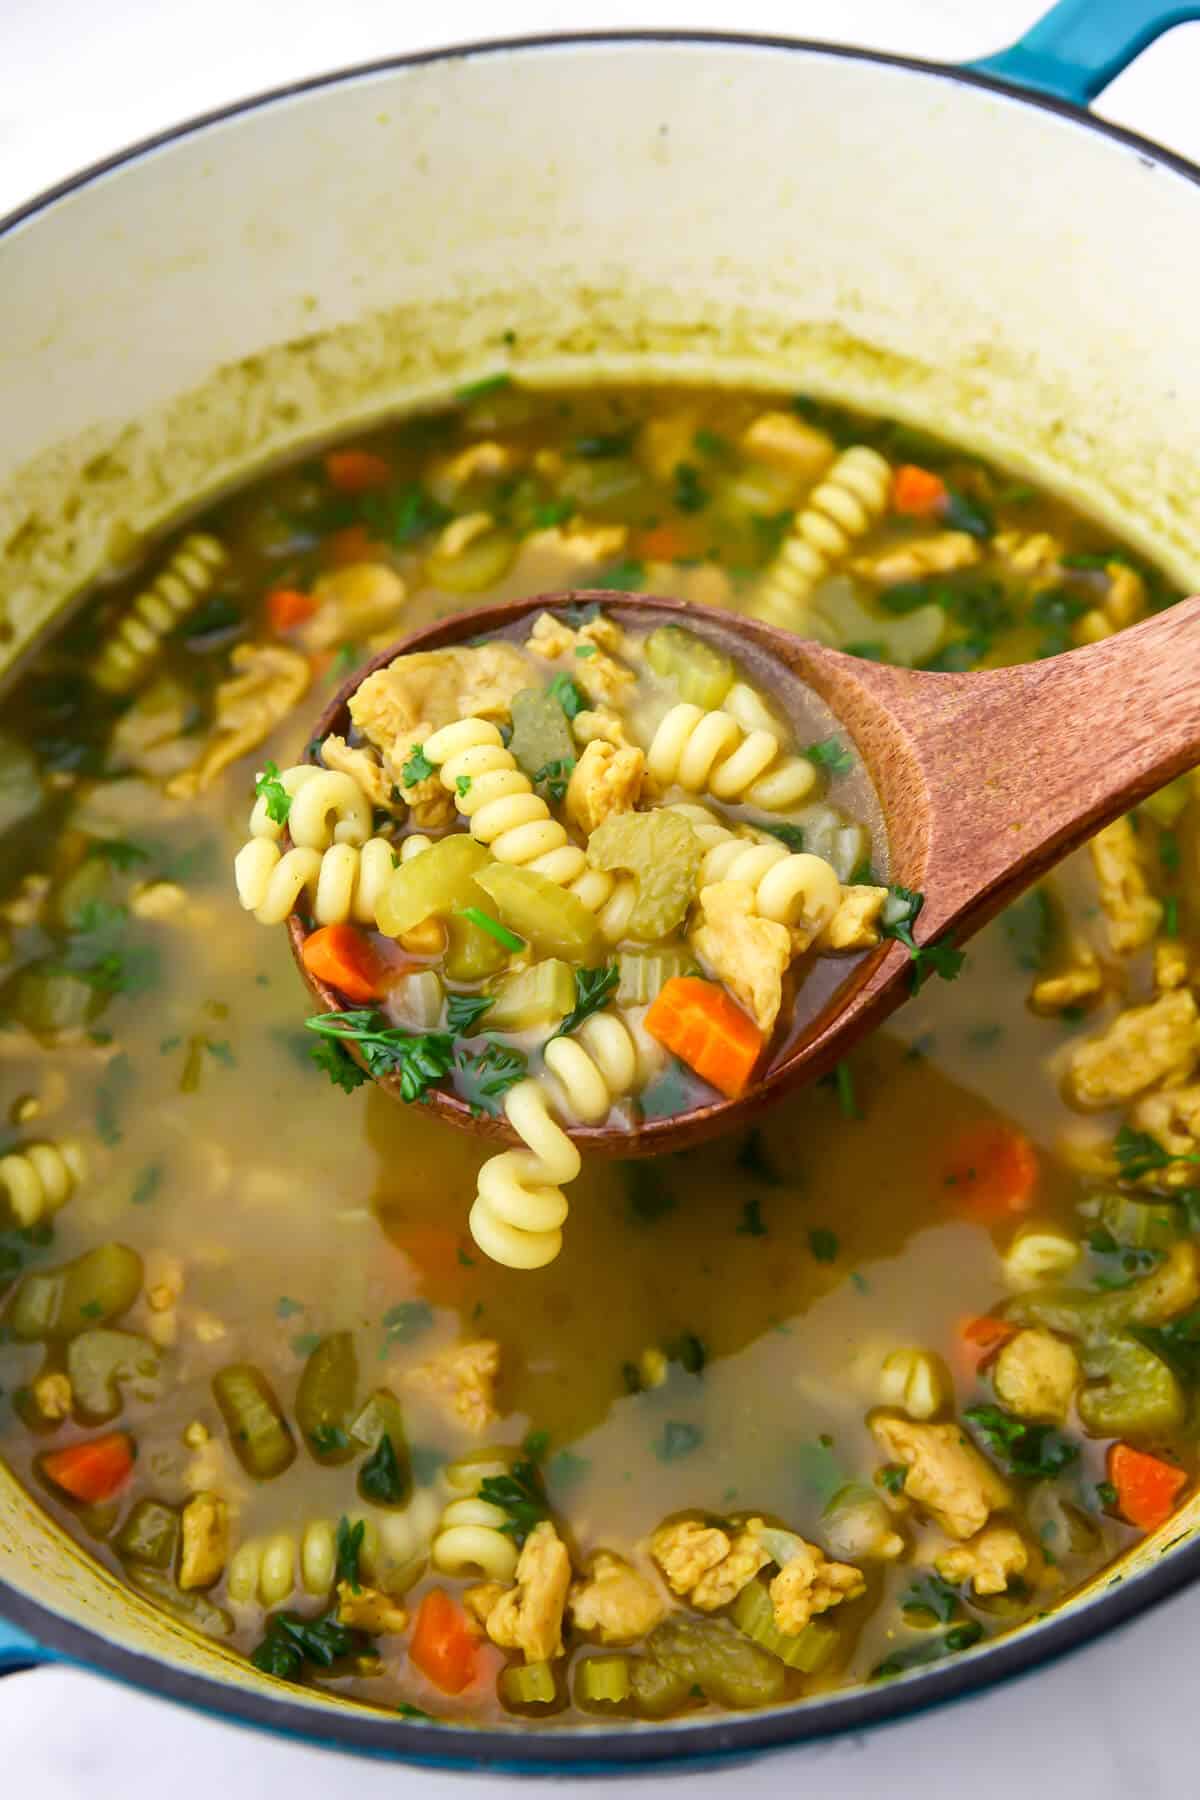 A large pot filled with vegan chicken noodle soup with carrots, celery, and soy curls in it.